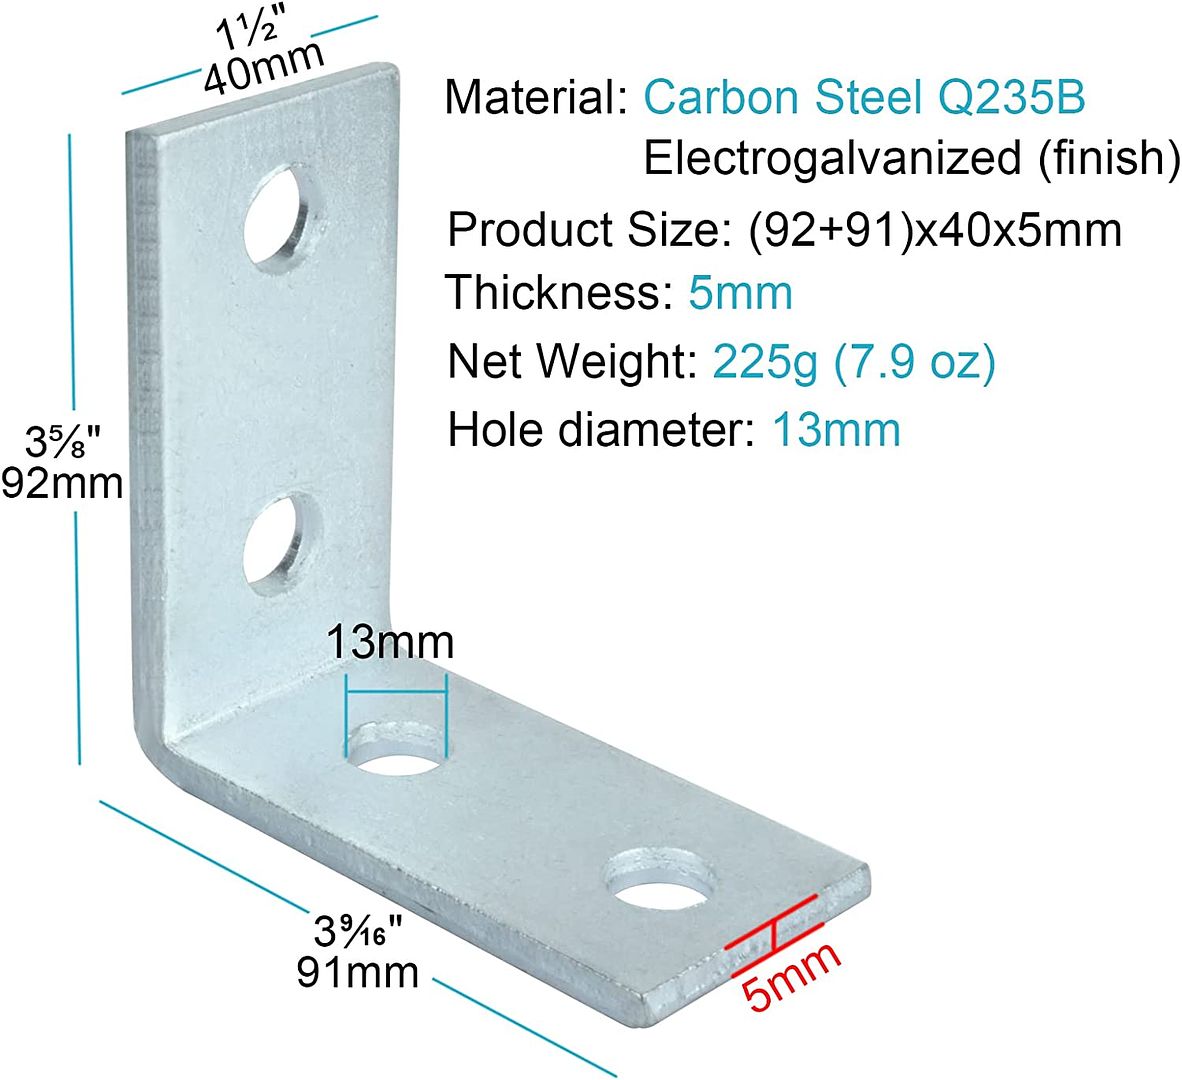 4 Hole L Shaped Connector Bracket, Length 3Â¼", Width 1Â½", Hole Distance 1Â¾", Thickness 5mm, Fit for Â½" Bolt in 1-5/8" Strut Channel, Steel Galvanized